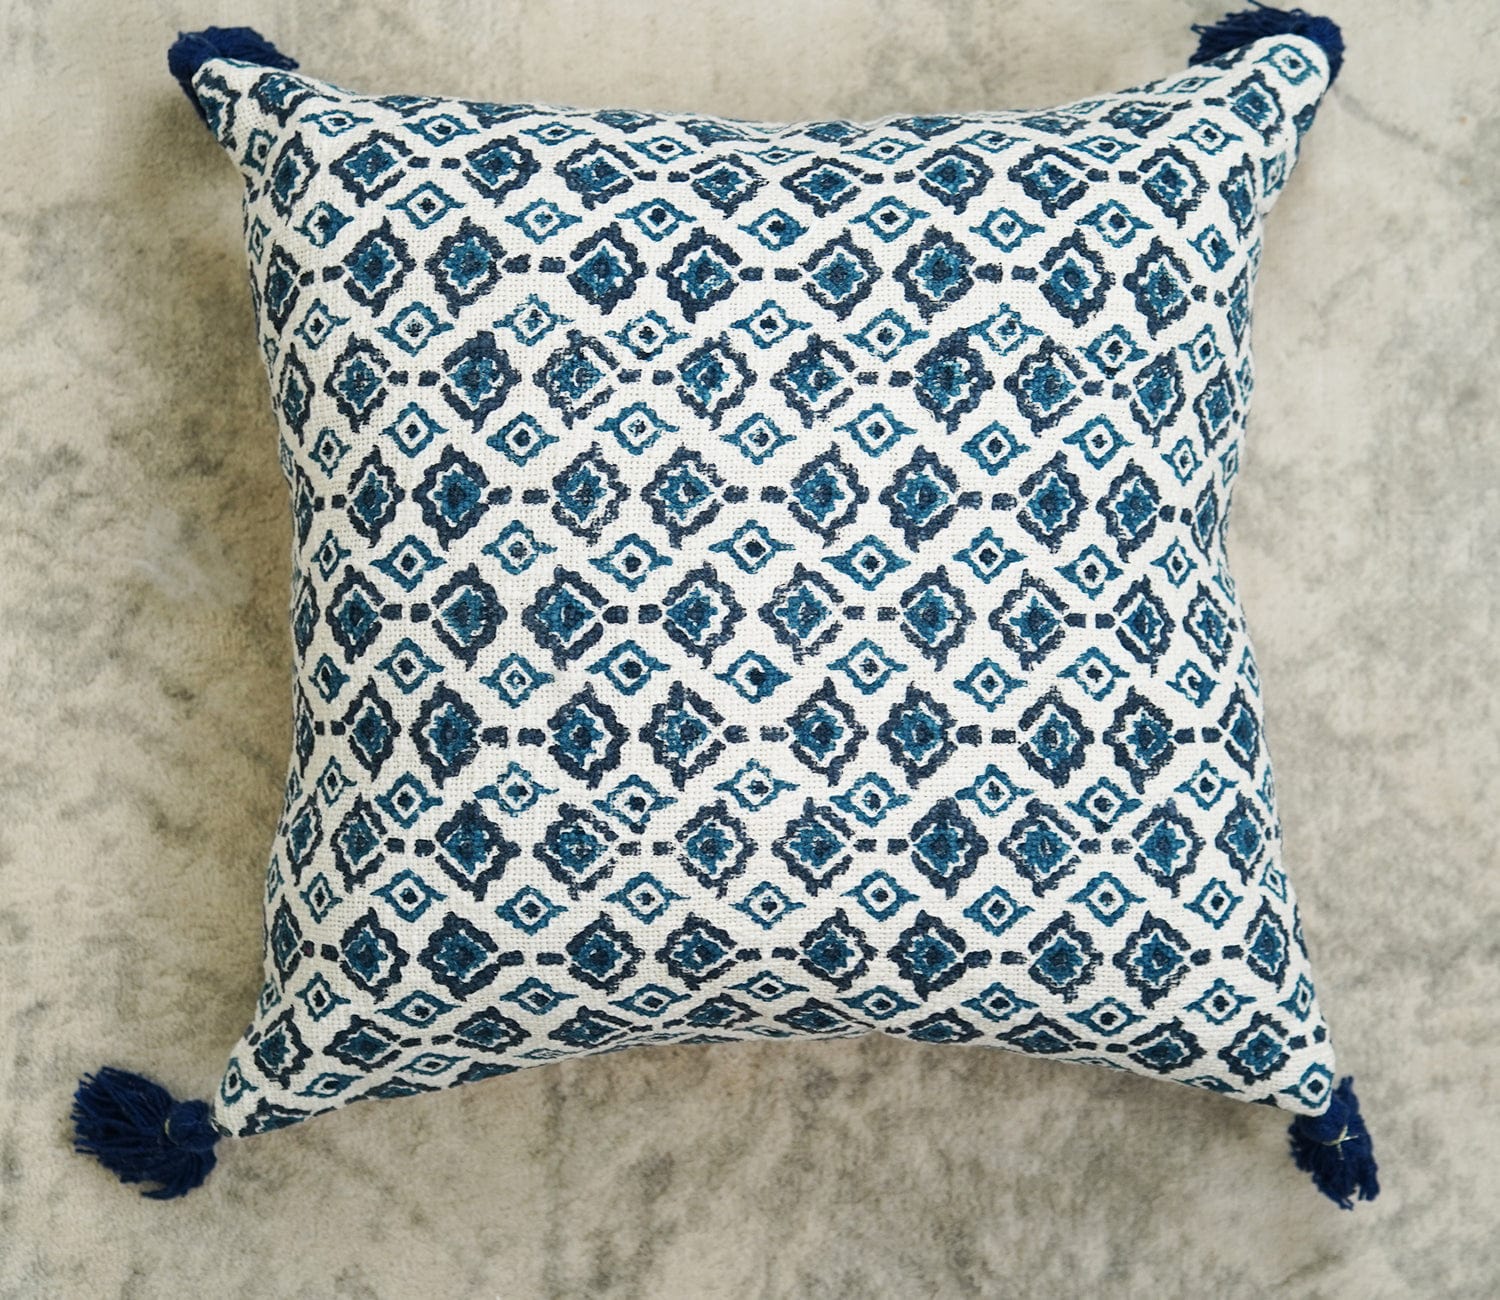 Hand Block Pattern 100% Cotton Cushion Cover Set of 2 (Blue, 18 x 18 Inch)